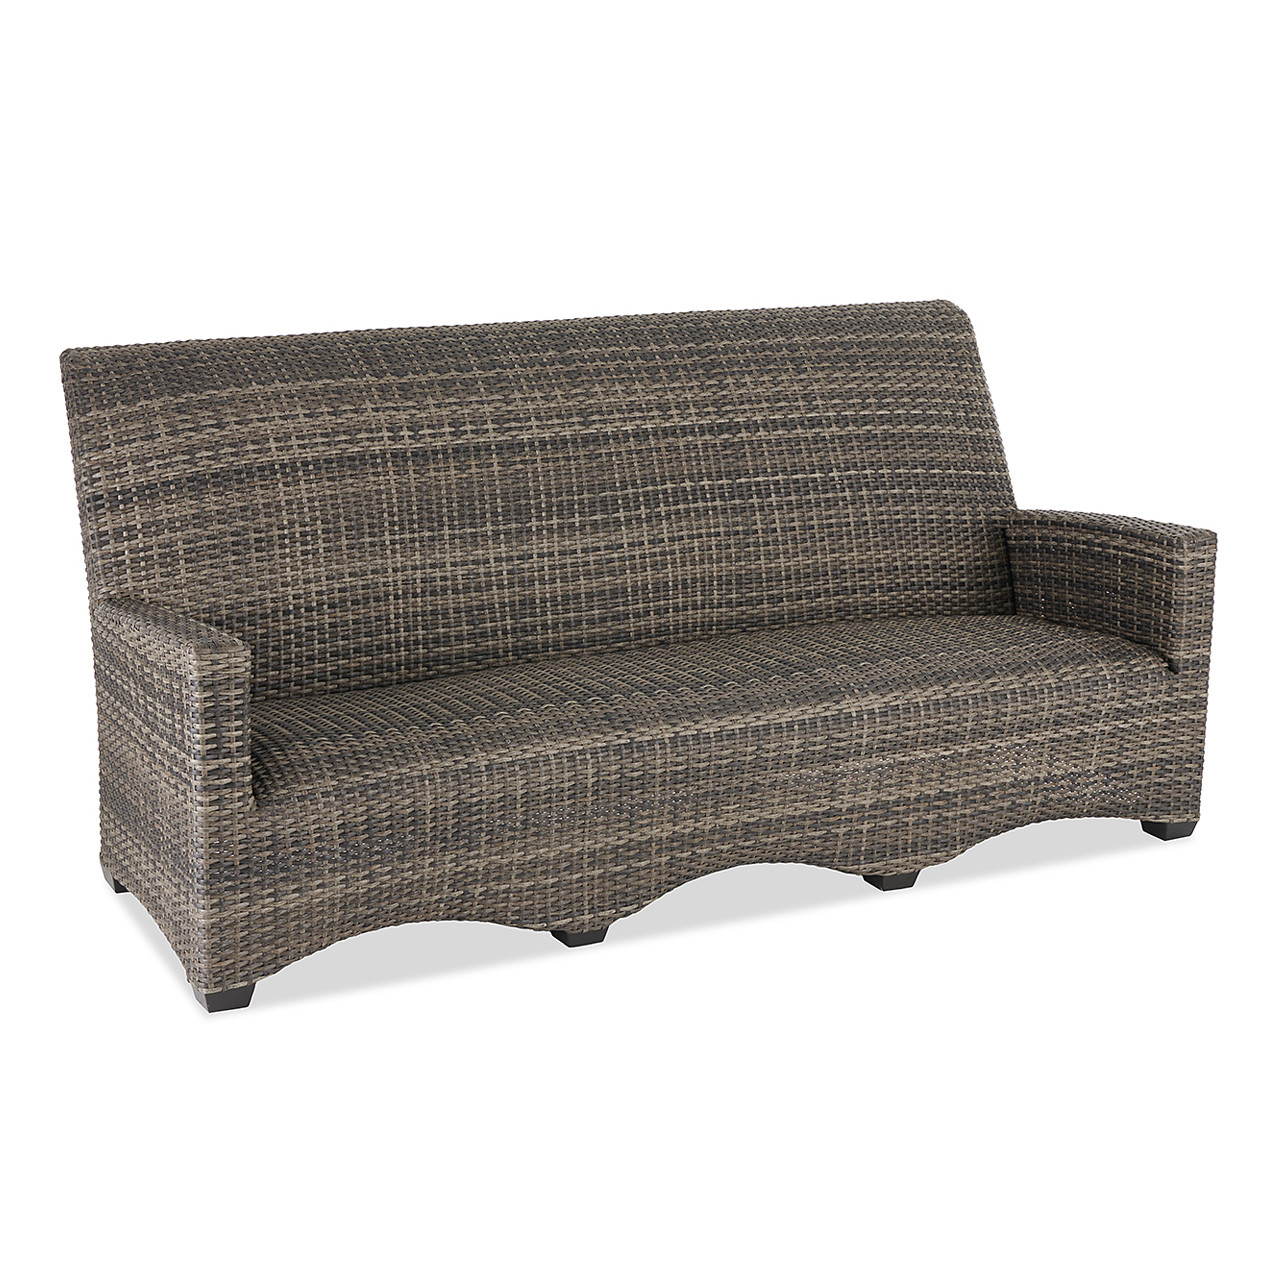 Sydney Husk Outdoor Wicker and Concealed Cushion 4 pc. Swivel Sofa Group with 48 x 26 in. Coffee Table